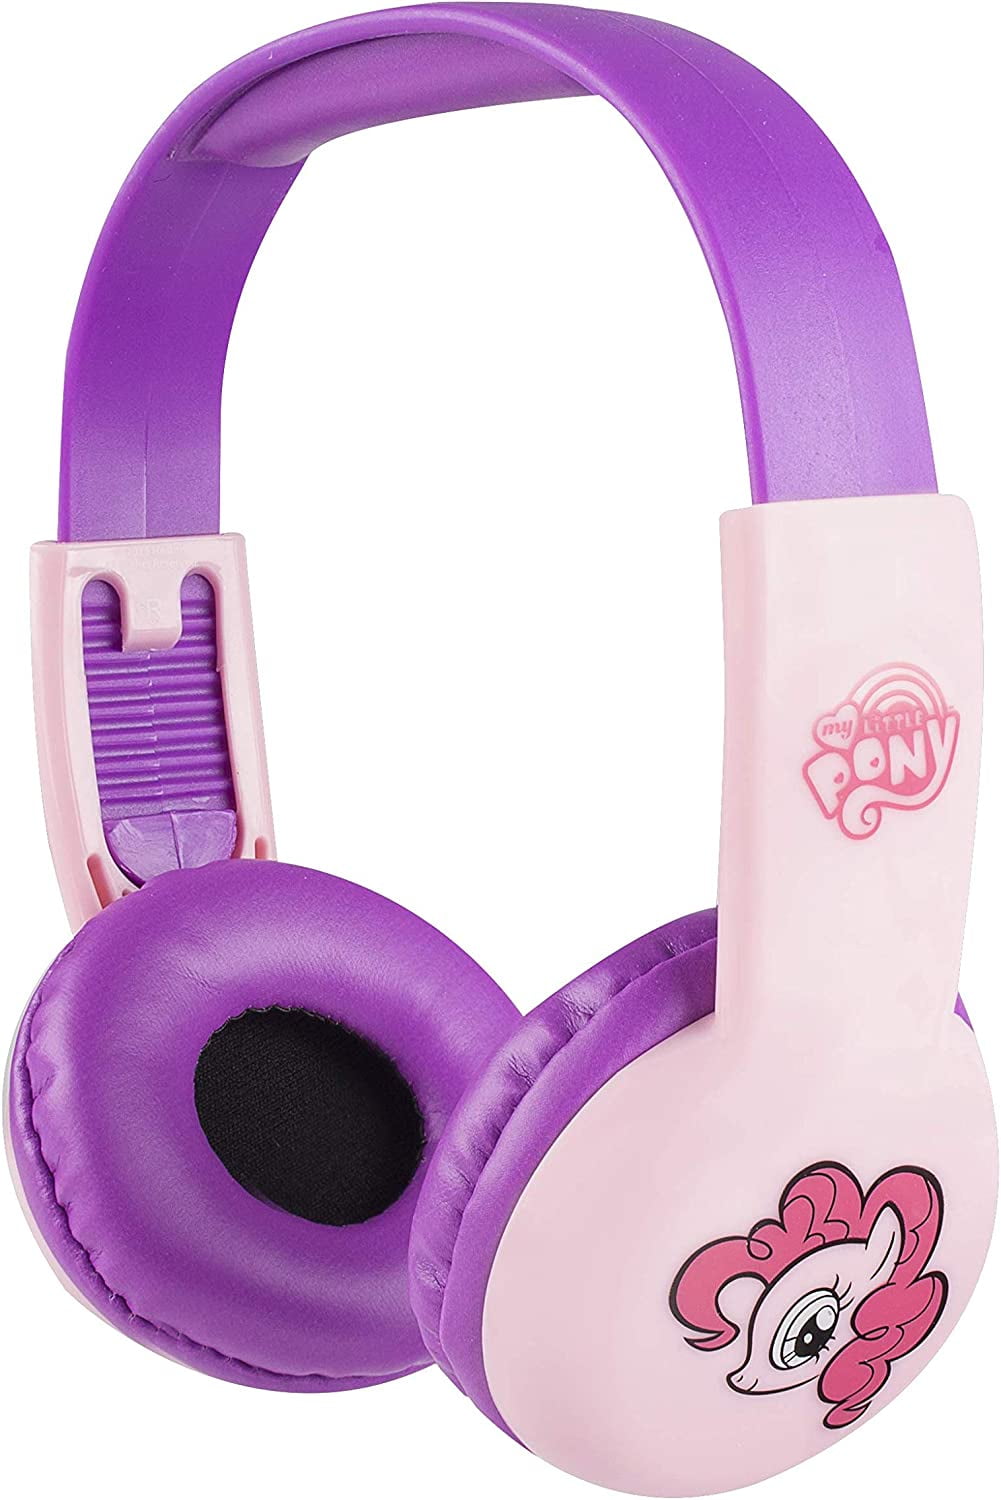 by Sakar Volume Limiter for Developing Ears Thomas and Friends Kids Safe Over The Ear Headphones 30385 3.5MM Stereo Jack Recommended for Ages 3-9 Kids Headphones 